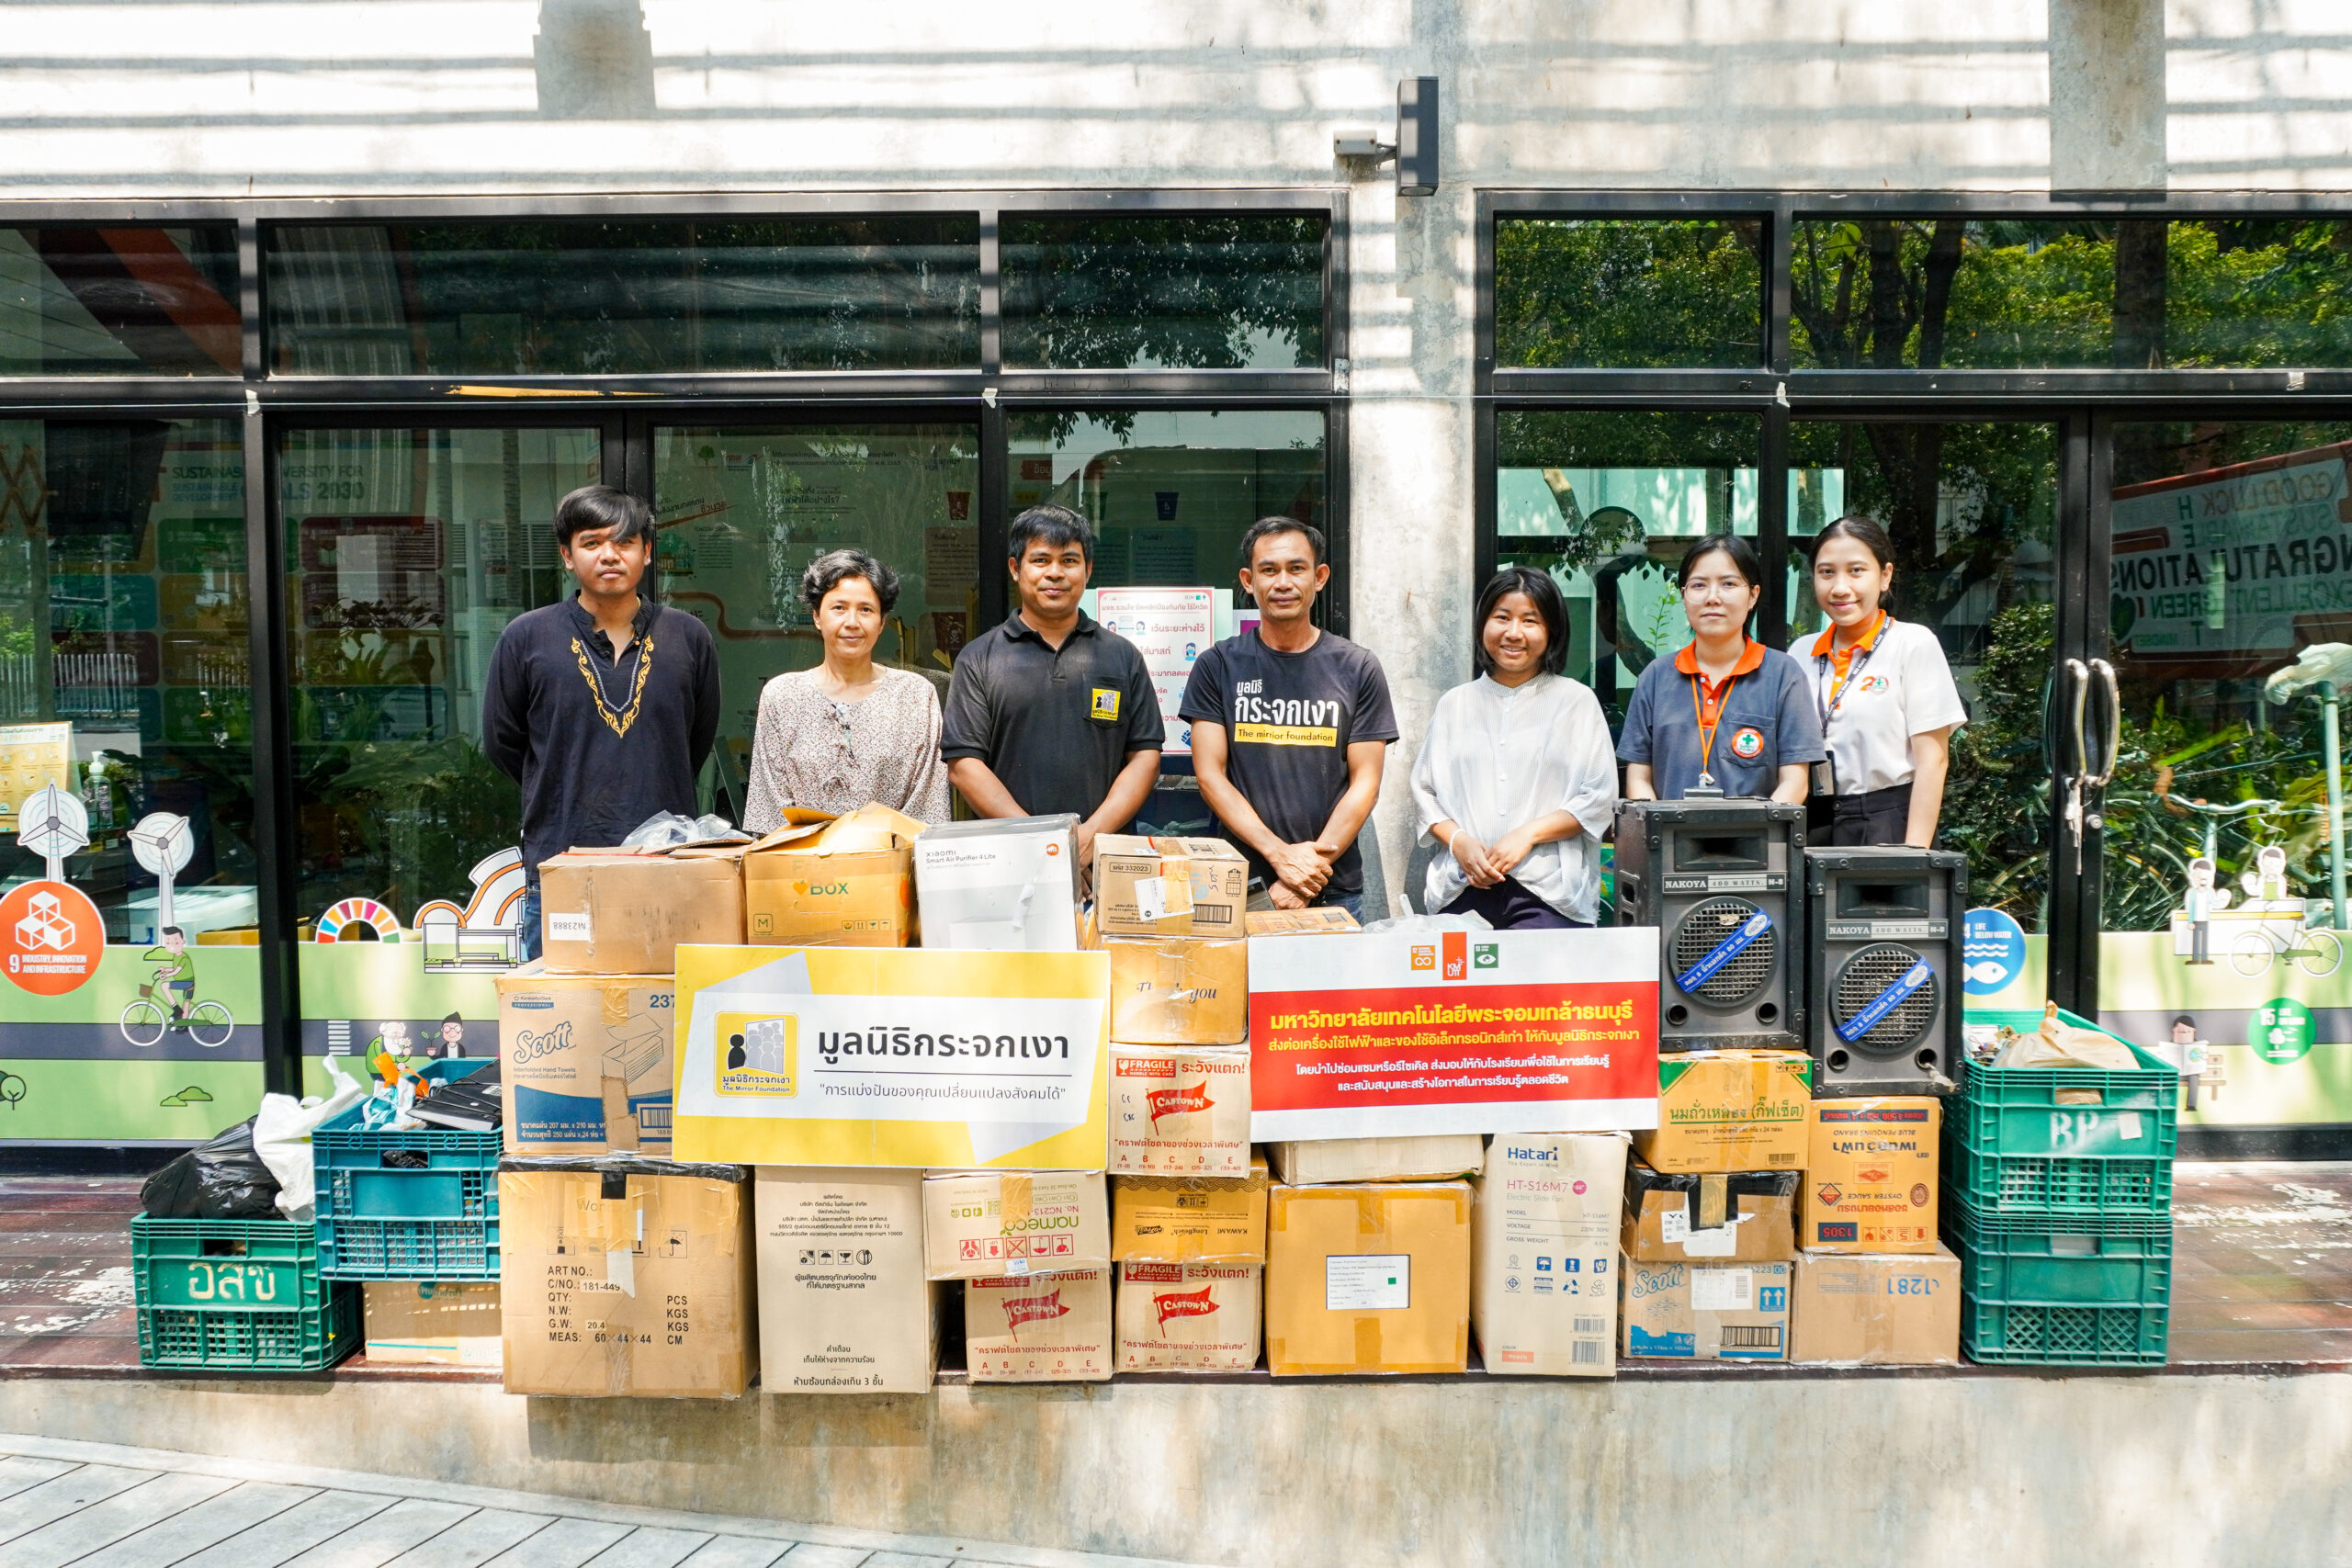 KMUTT Donates Electrical Appliances and Electronics to Mirror Foundation for Computer Project for Children